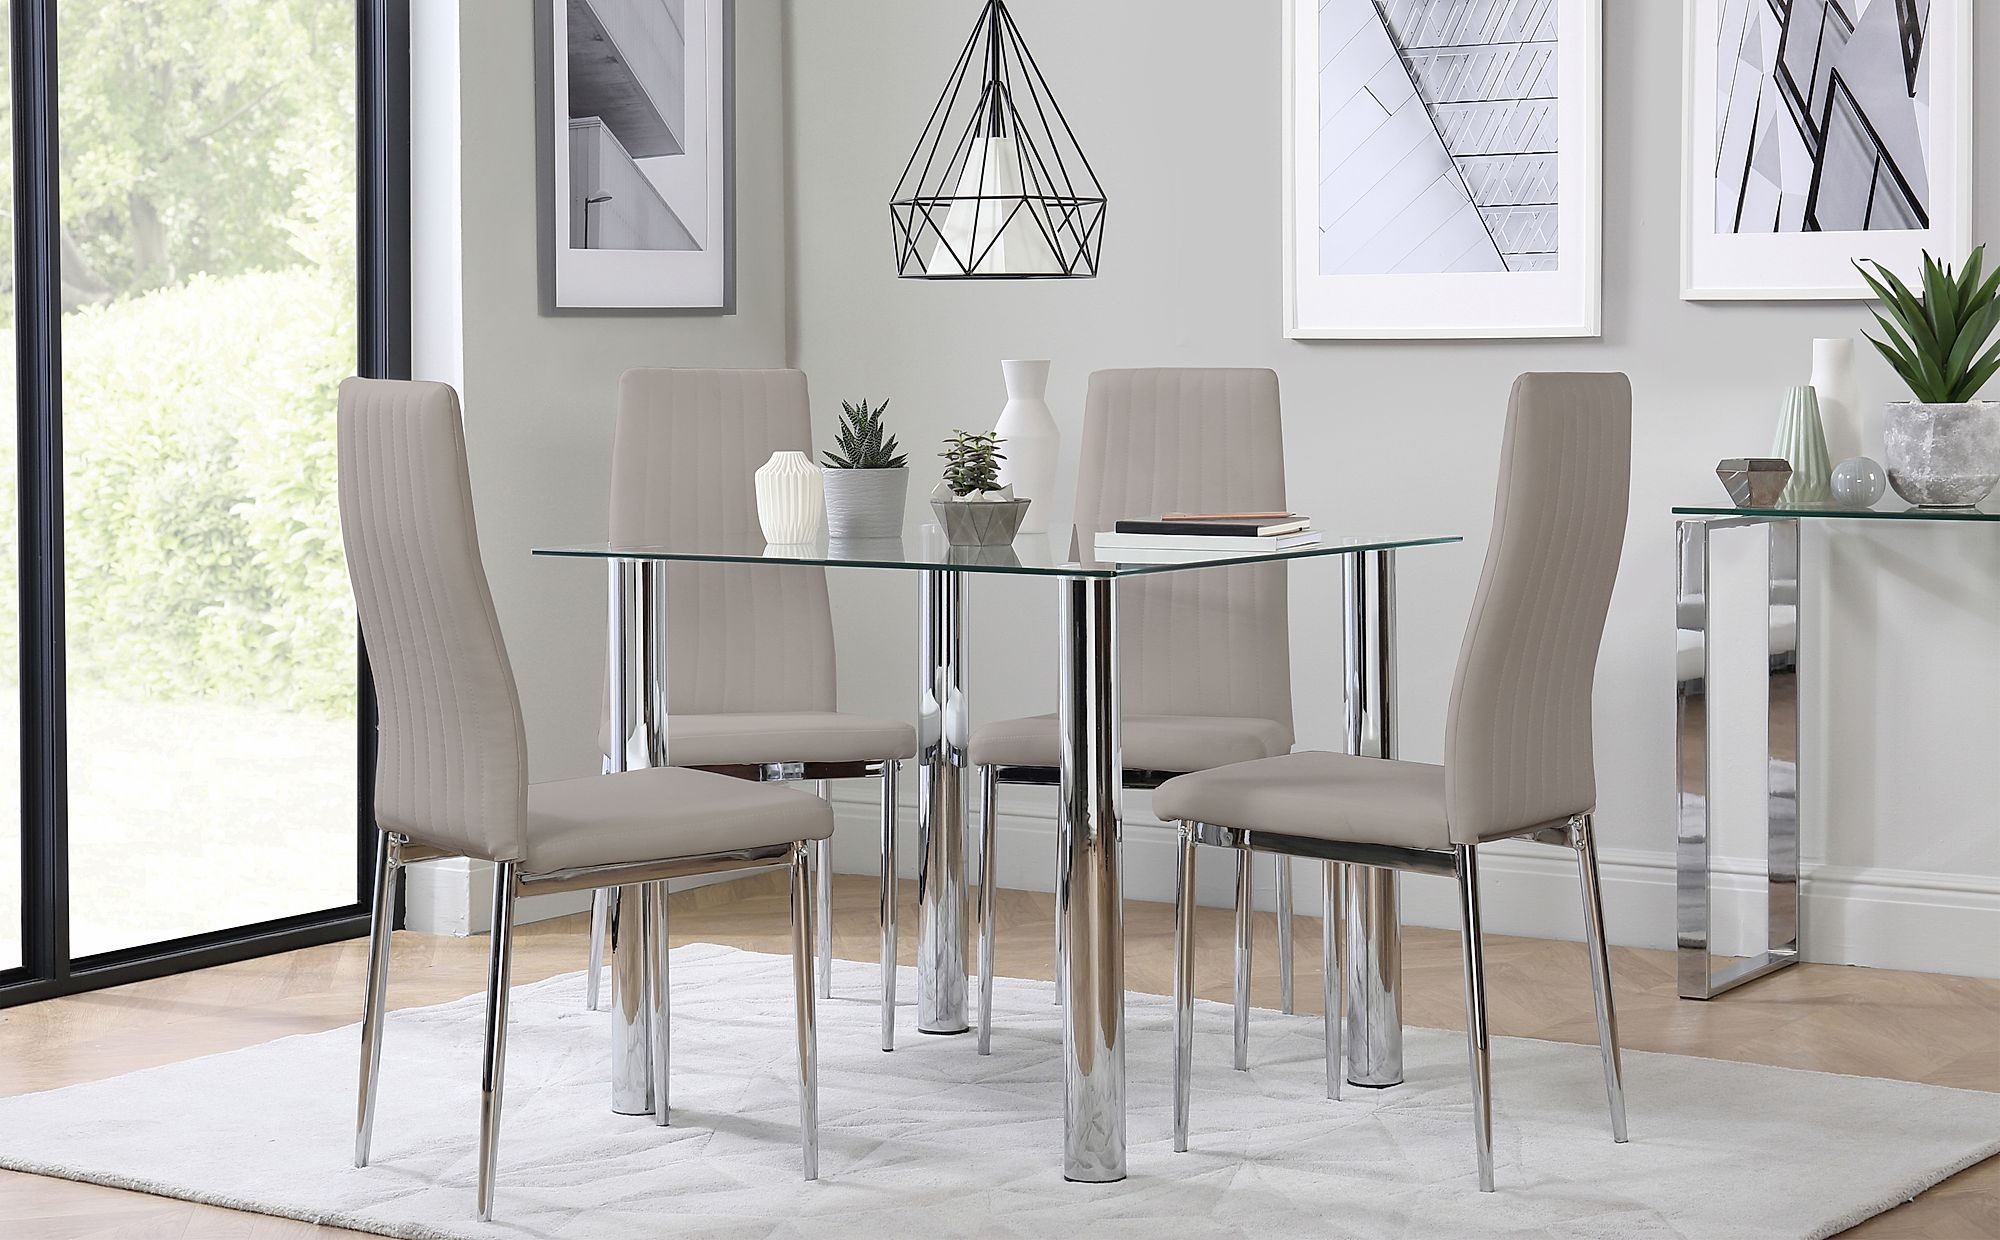 Square Glass Dining Room Table For 8